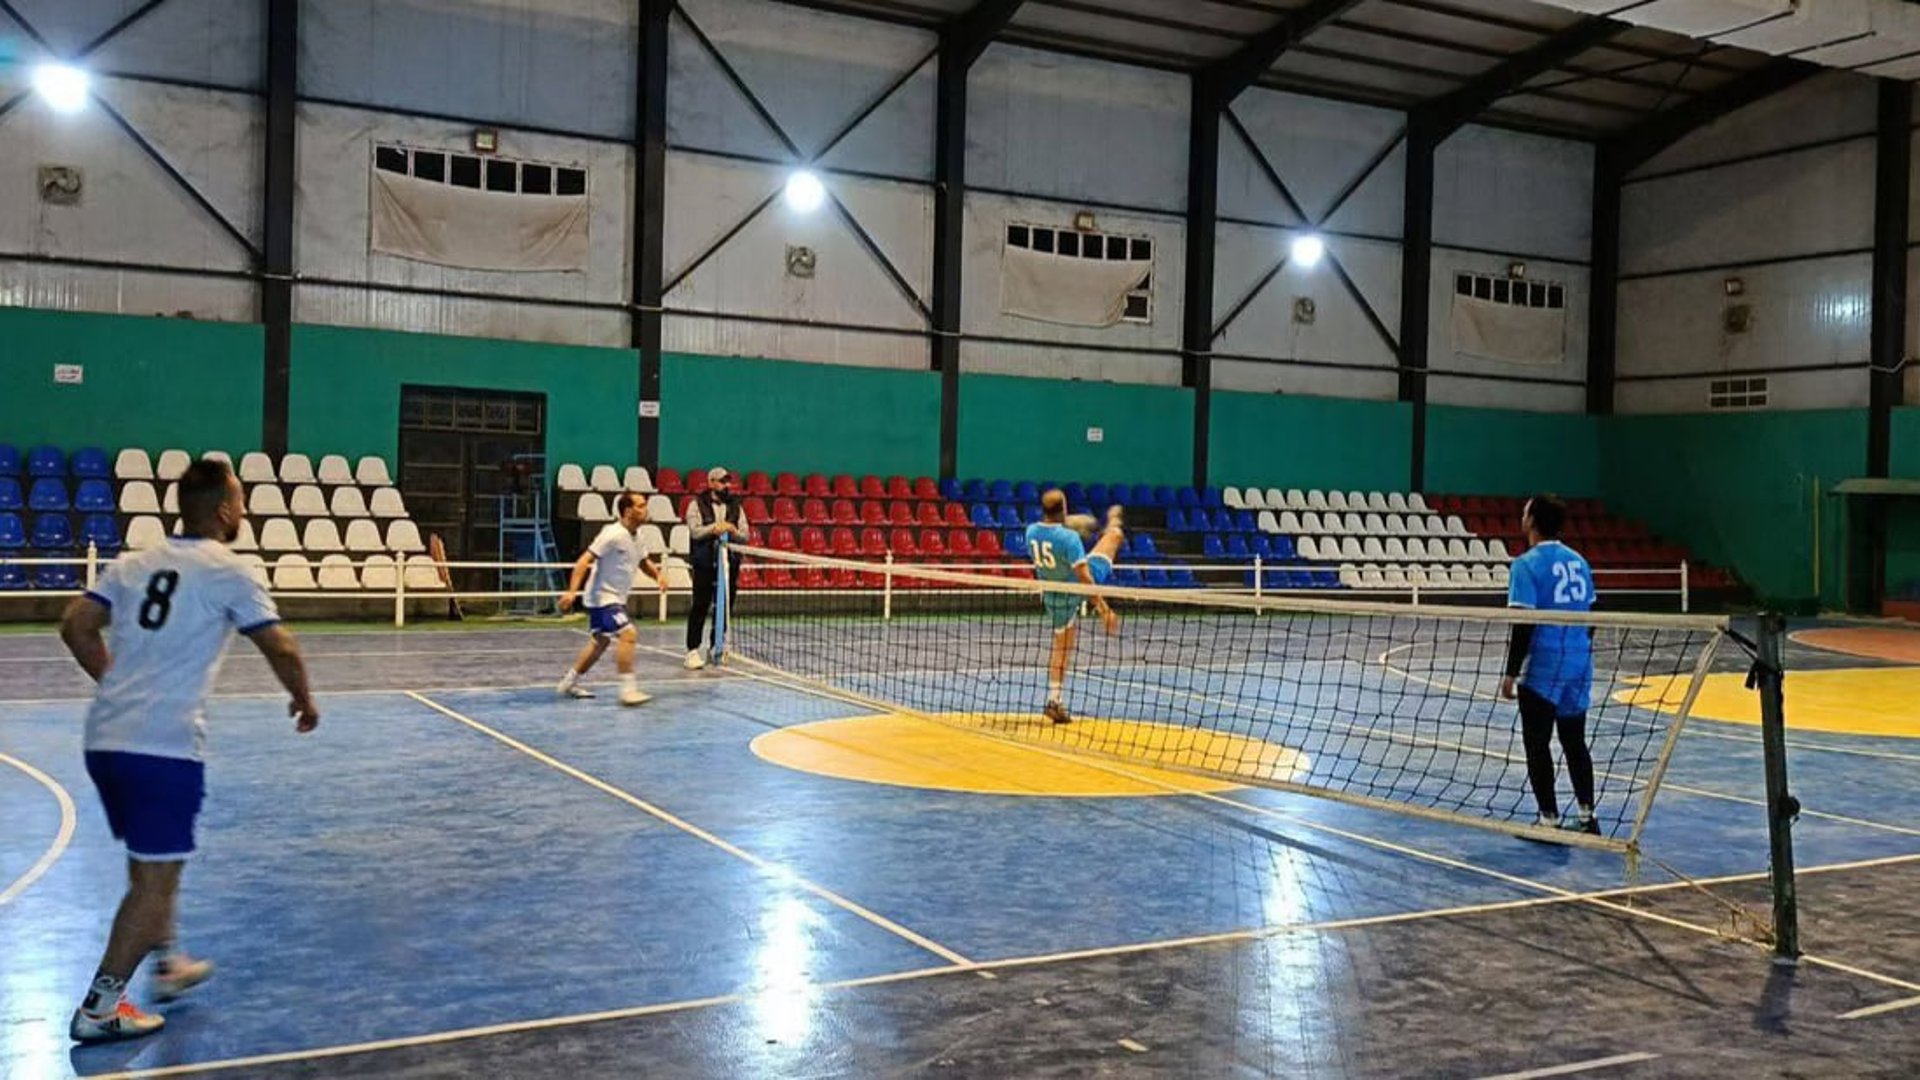 League introduces futnet to Anbar hopes to build love for the sport among locals